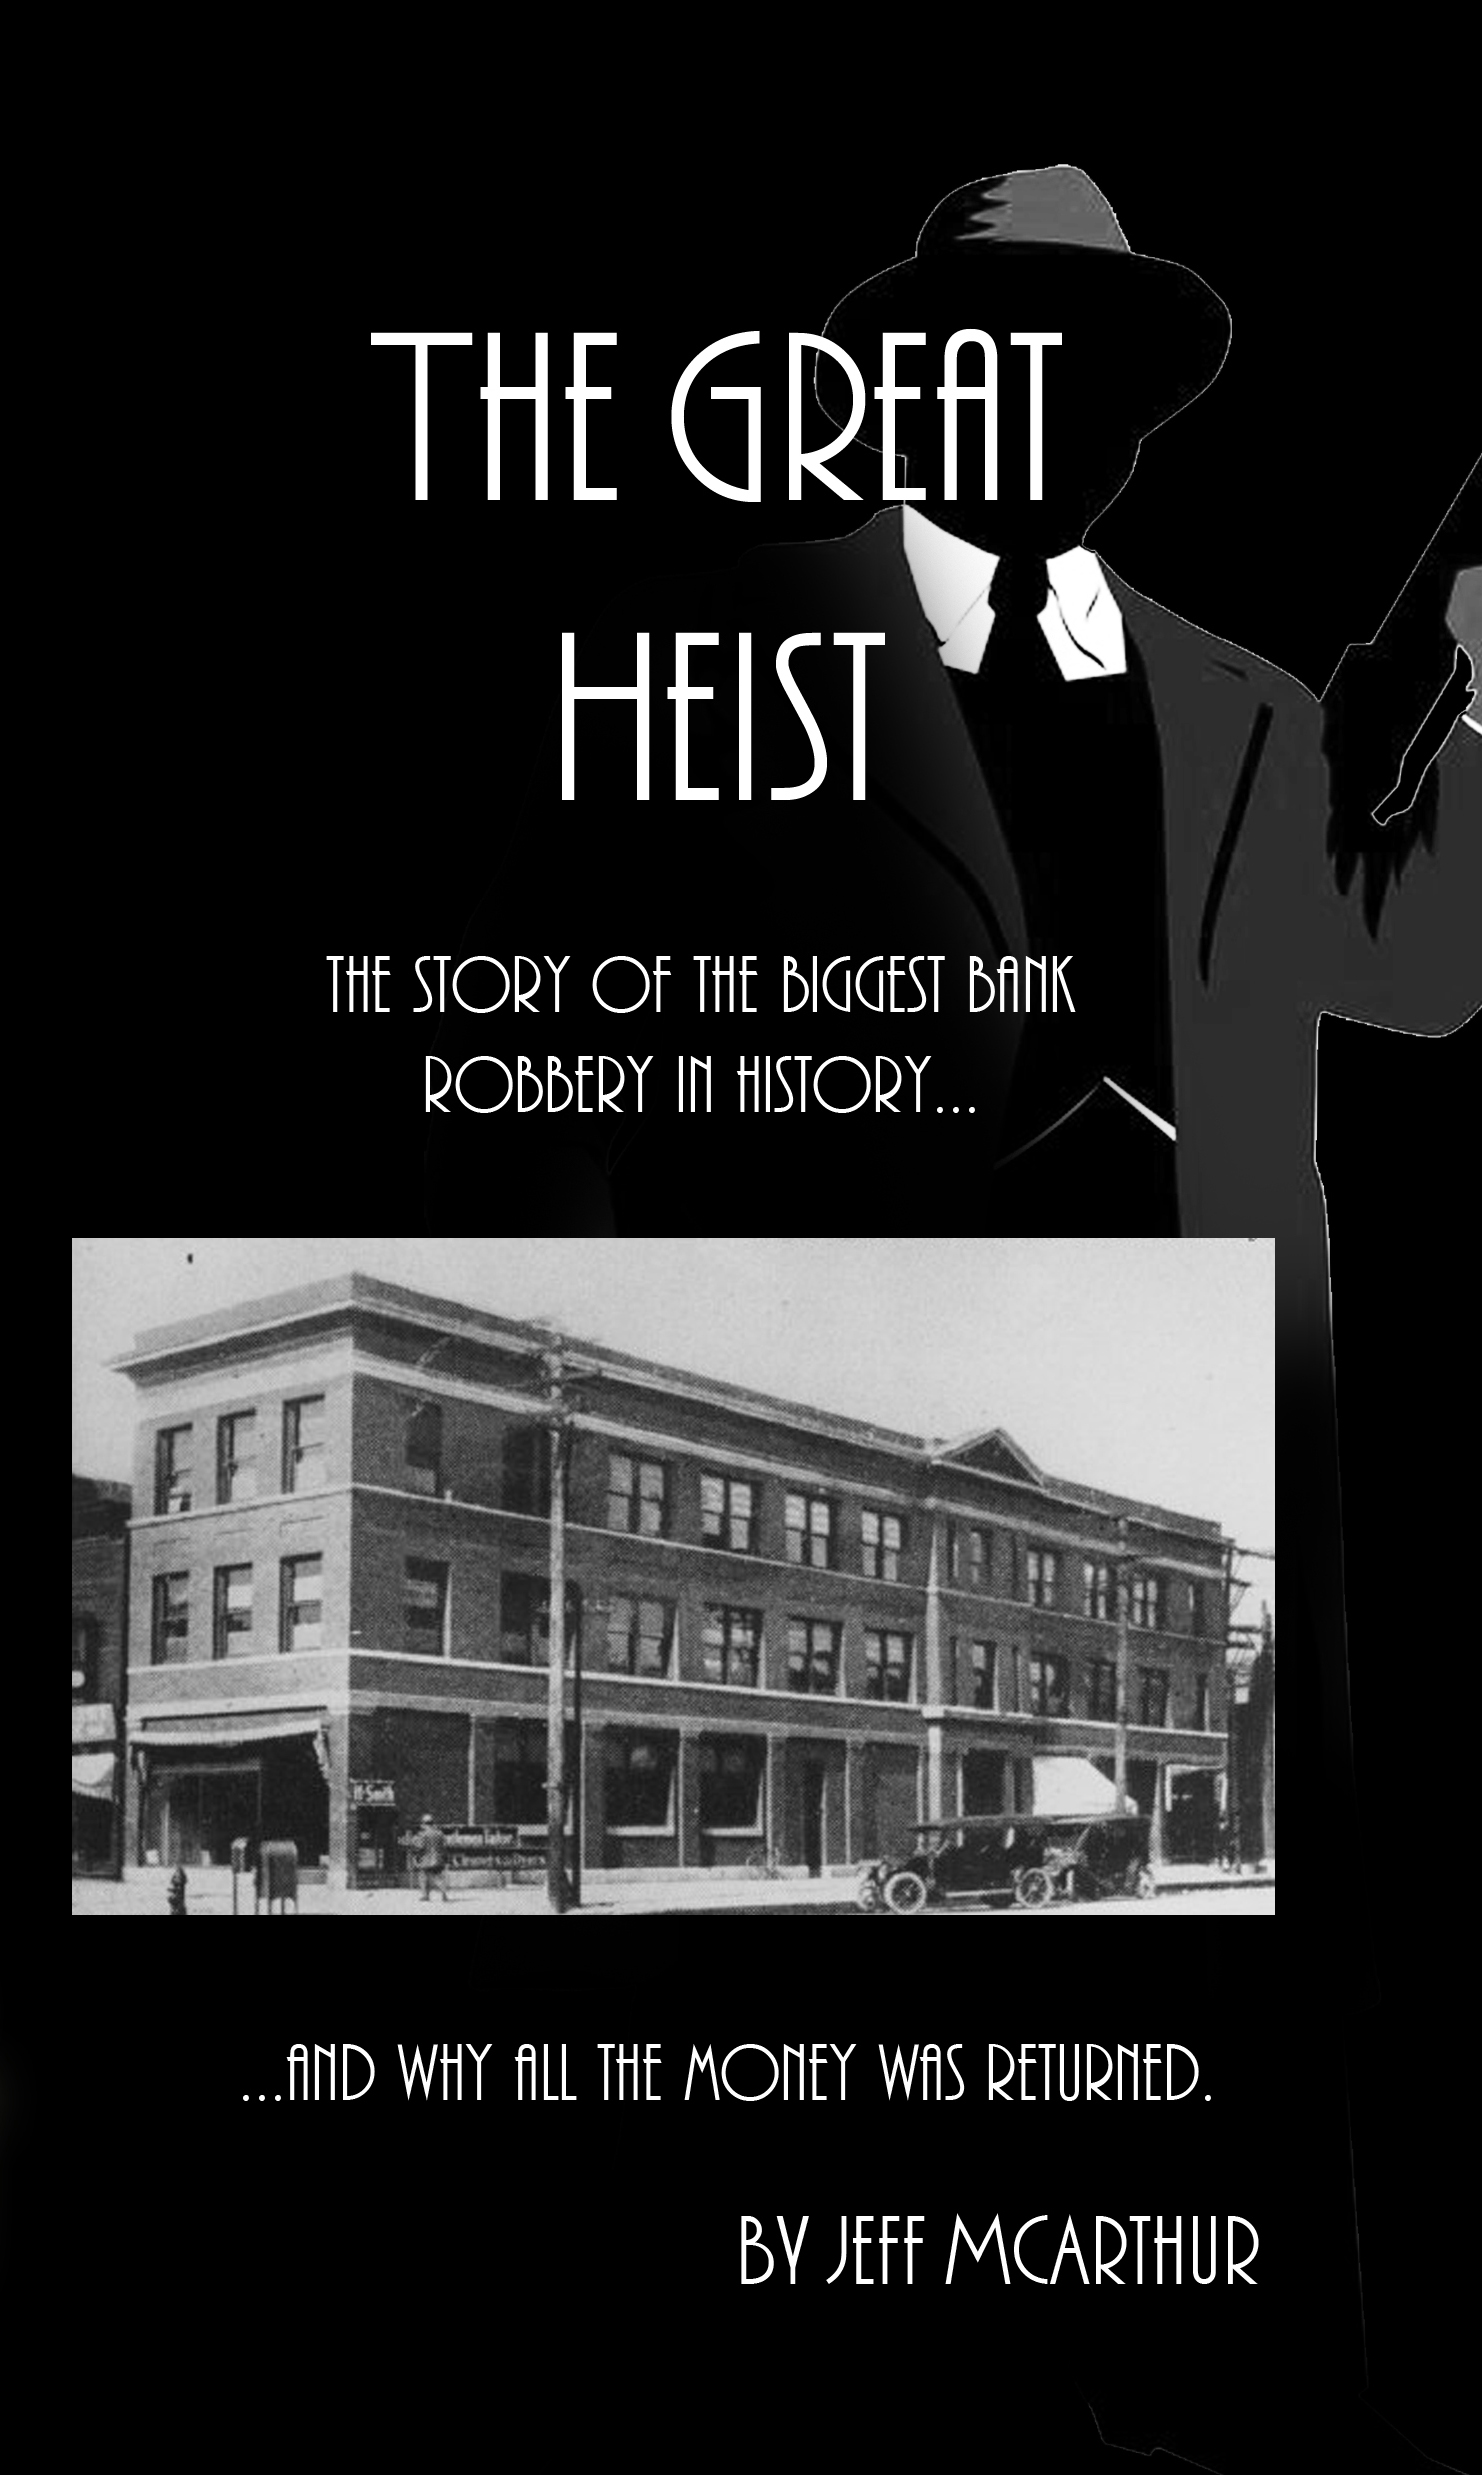 The Great Heist - the Story of the Biggest Bank Robbery in History